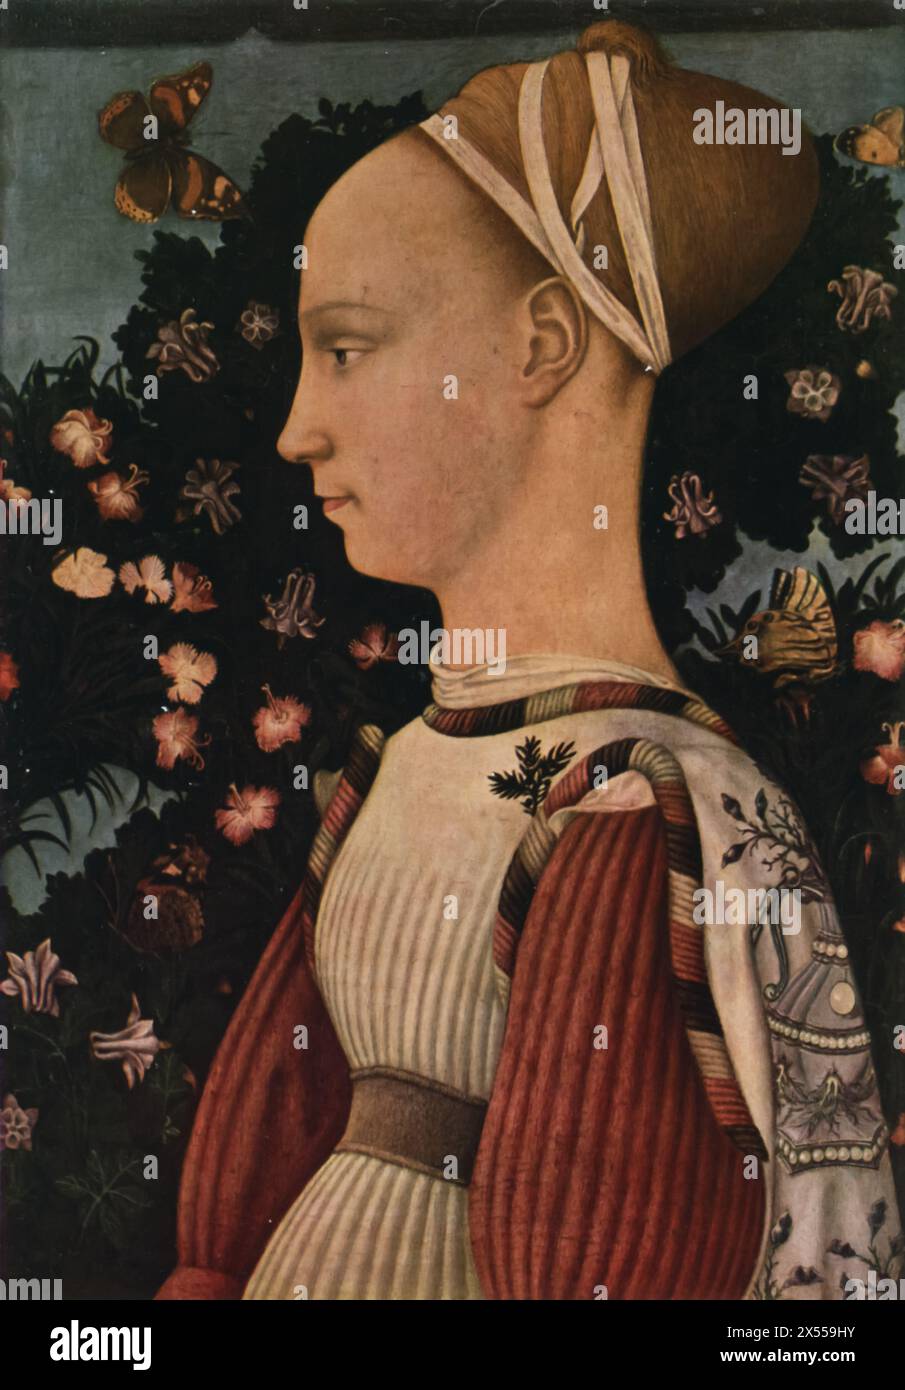 A Princess of the Este Family' by Pisanello, 1440, located at the Louvre Museum, Paris, France. This portrait features a member of the Este family, prominent patrons of the arts during the Italian Renaissance. Pisanello's skill captures the elegance and refined attire in 15th-century society. Stock Photo